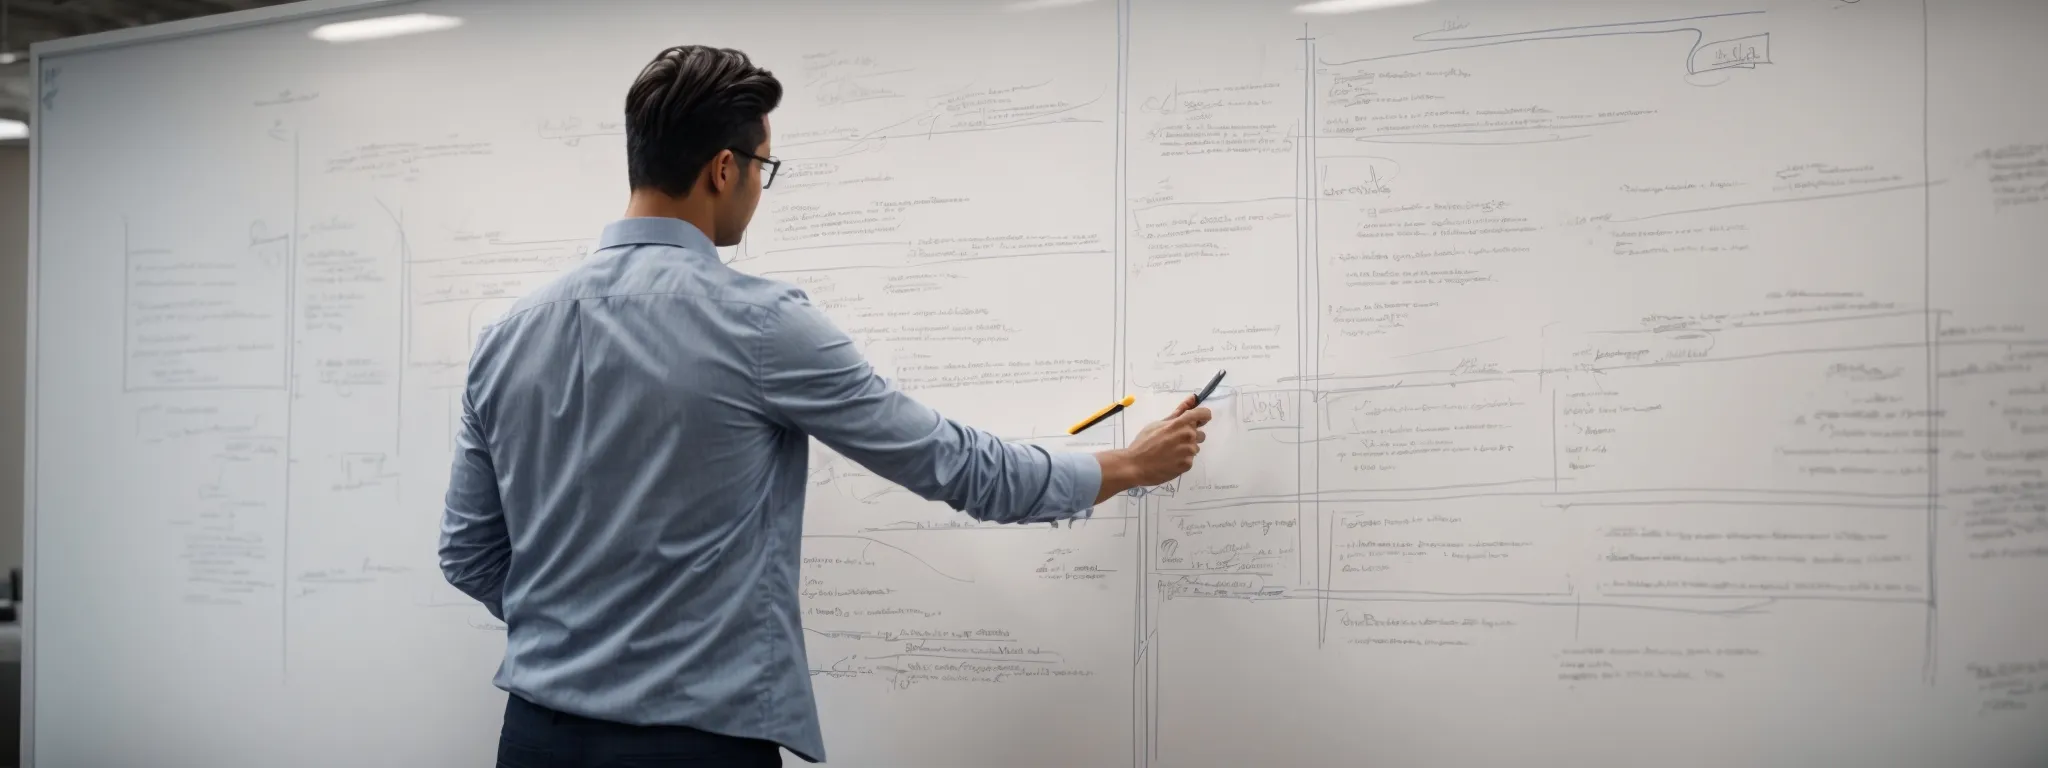 a marketer sketches a user-friendly website layout on a whiteboard, integrating seo best practices with clear navigation paths.